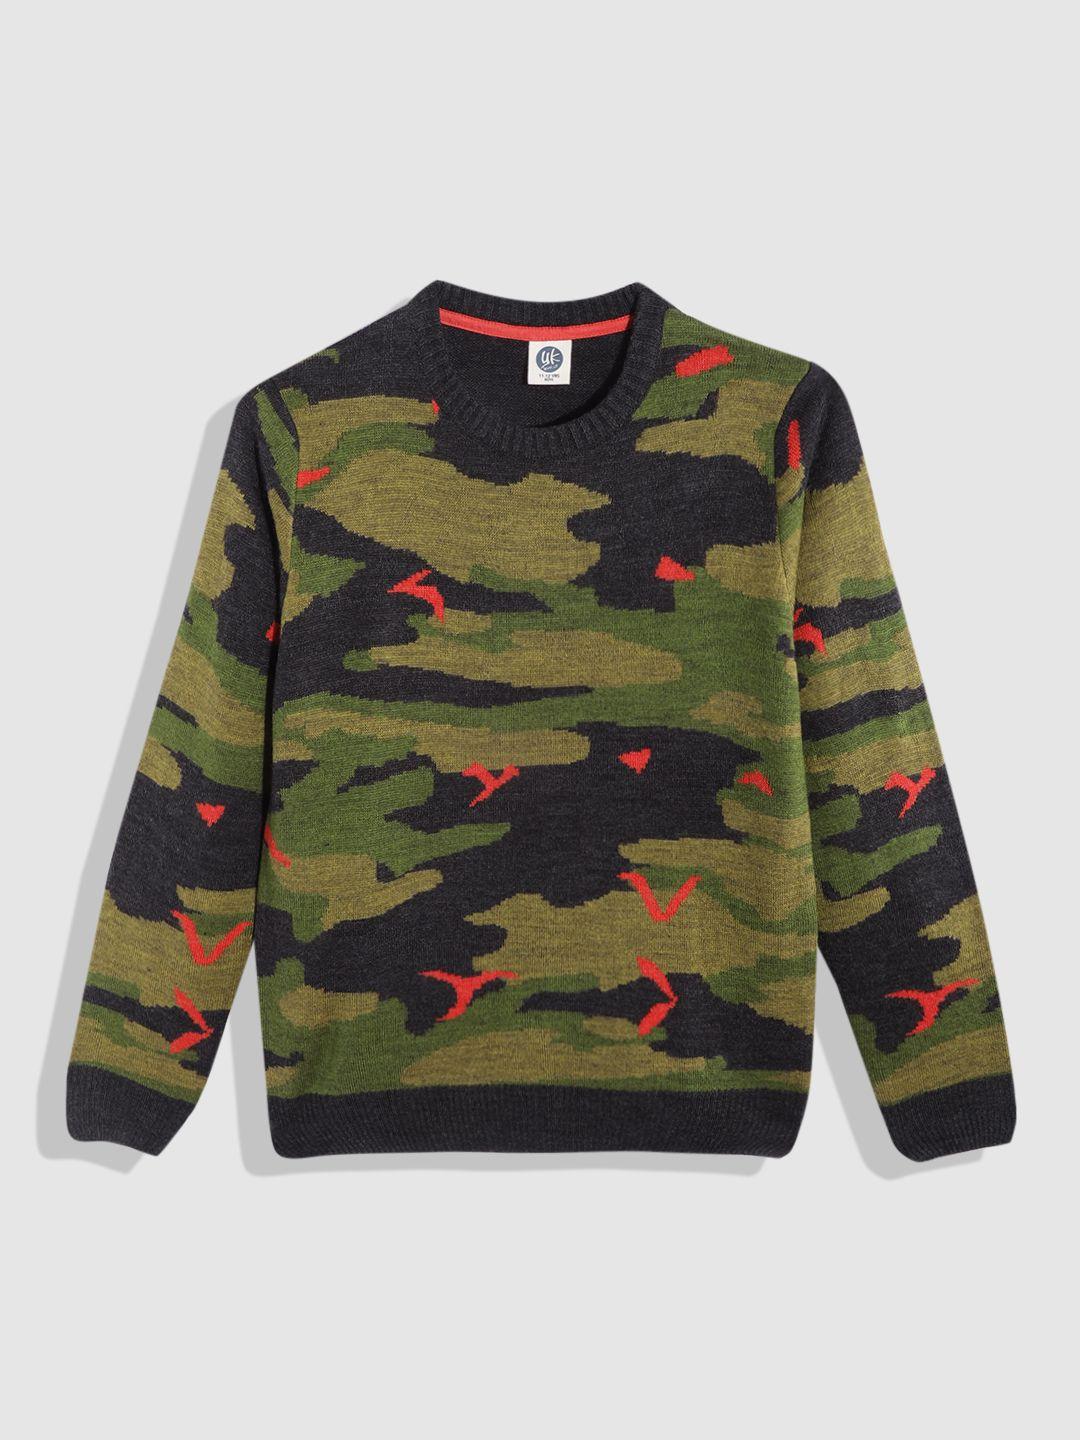 yk boys olive green & black camouflage printed pullover